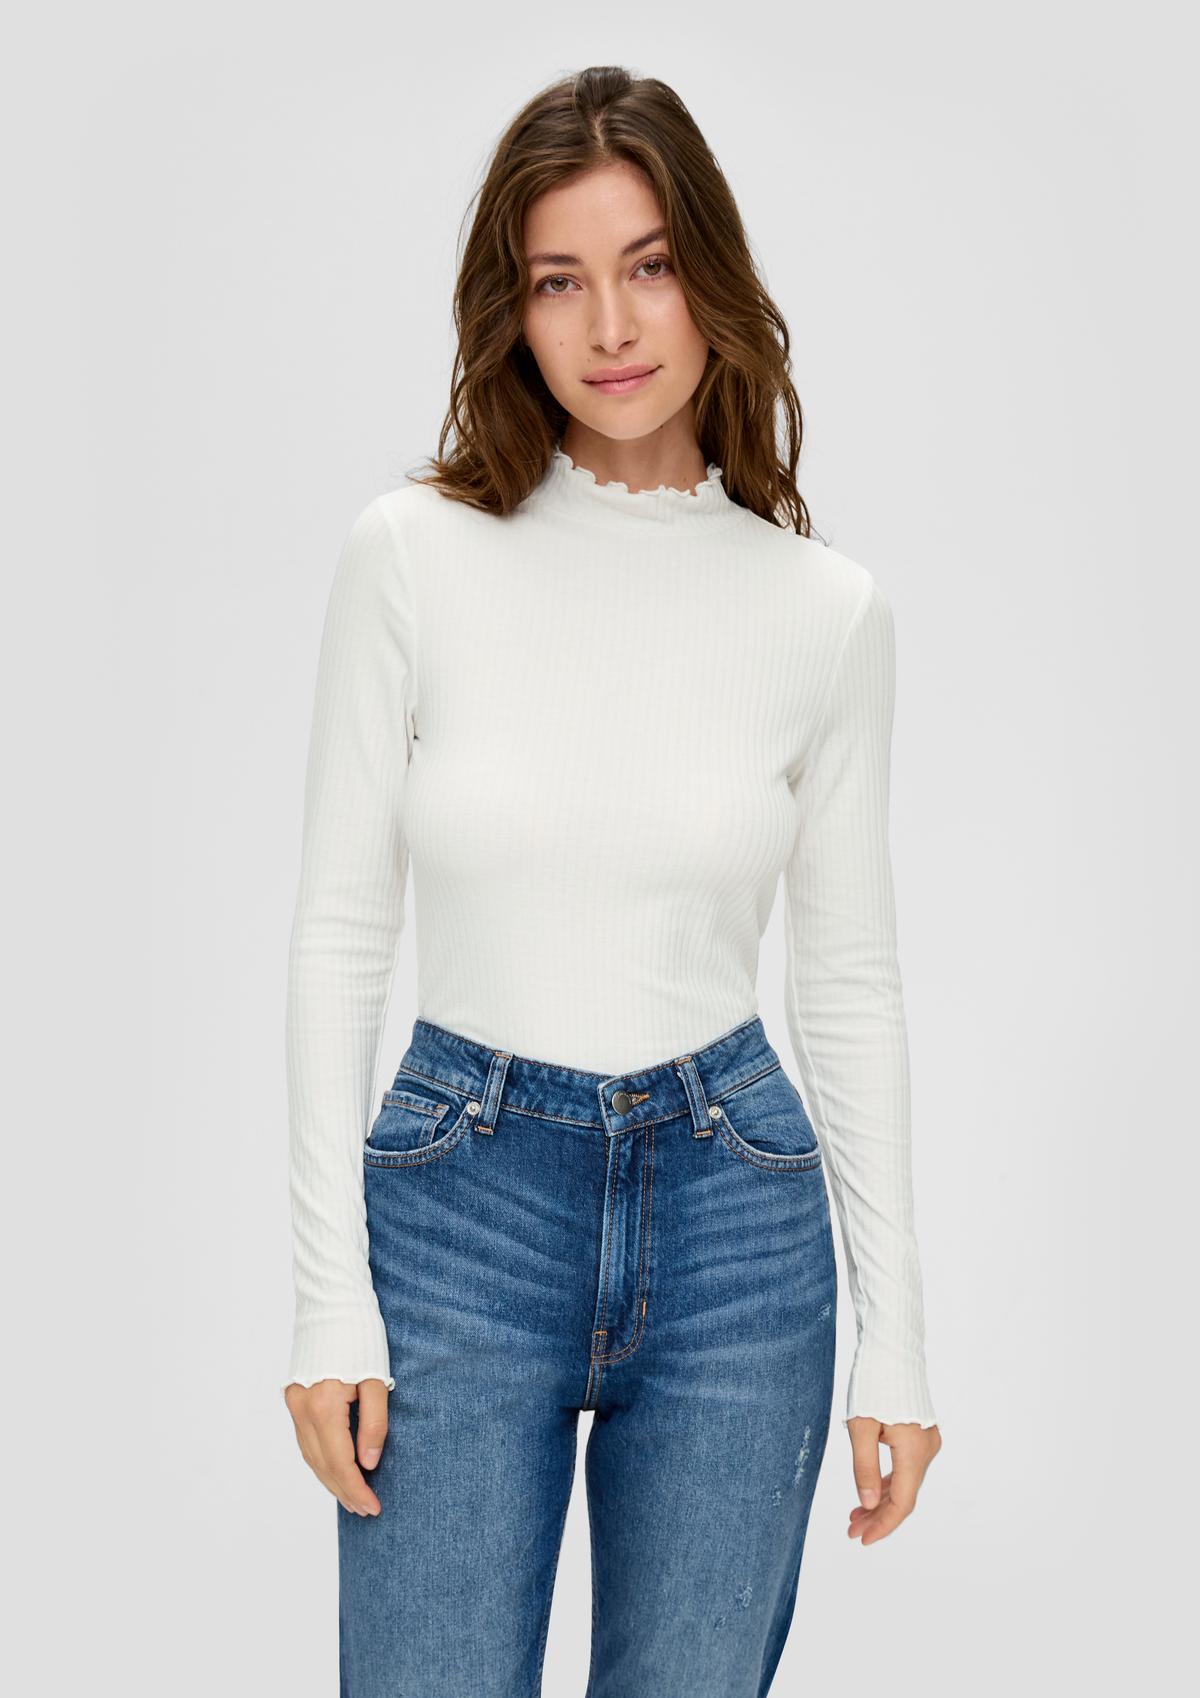 Long sleeve top with a rolled hem